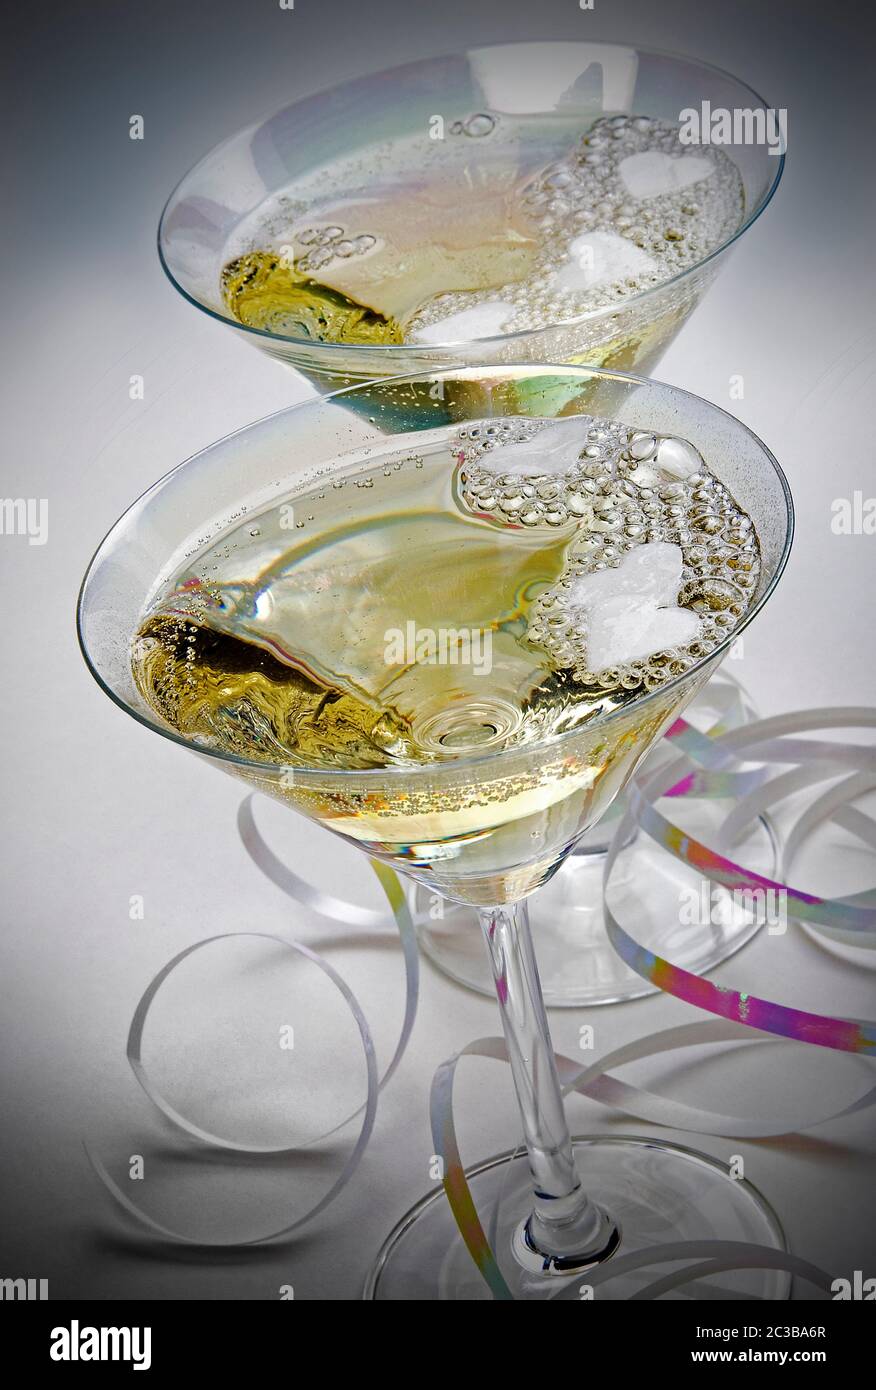 Champagne in glasses with ribbon on plain background and elevated viewpoint Stock Photo